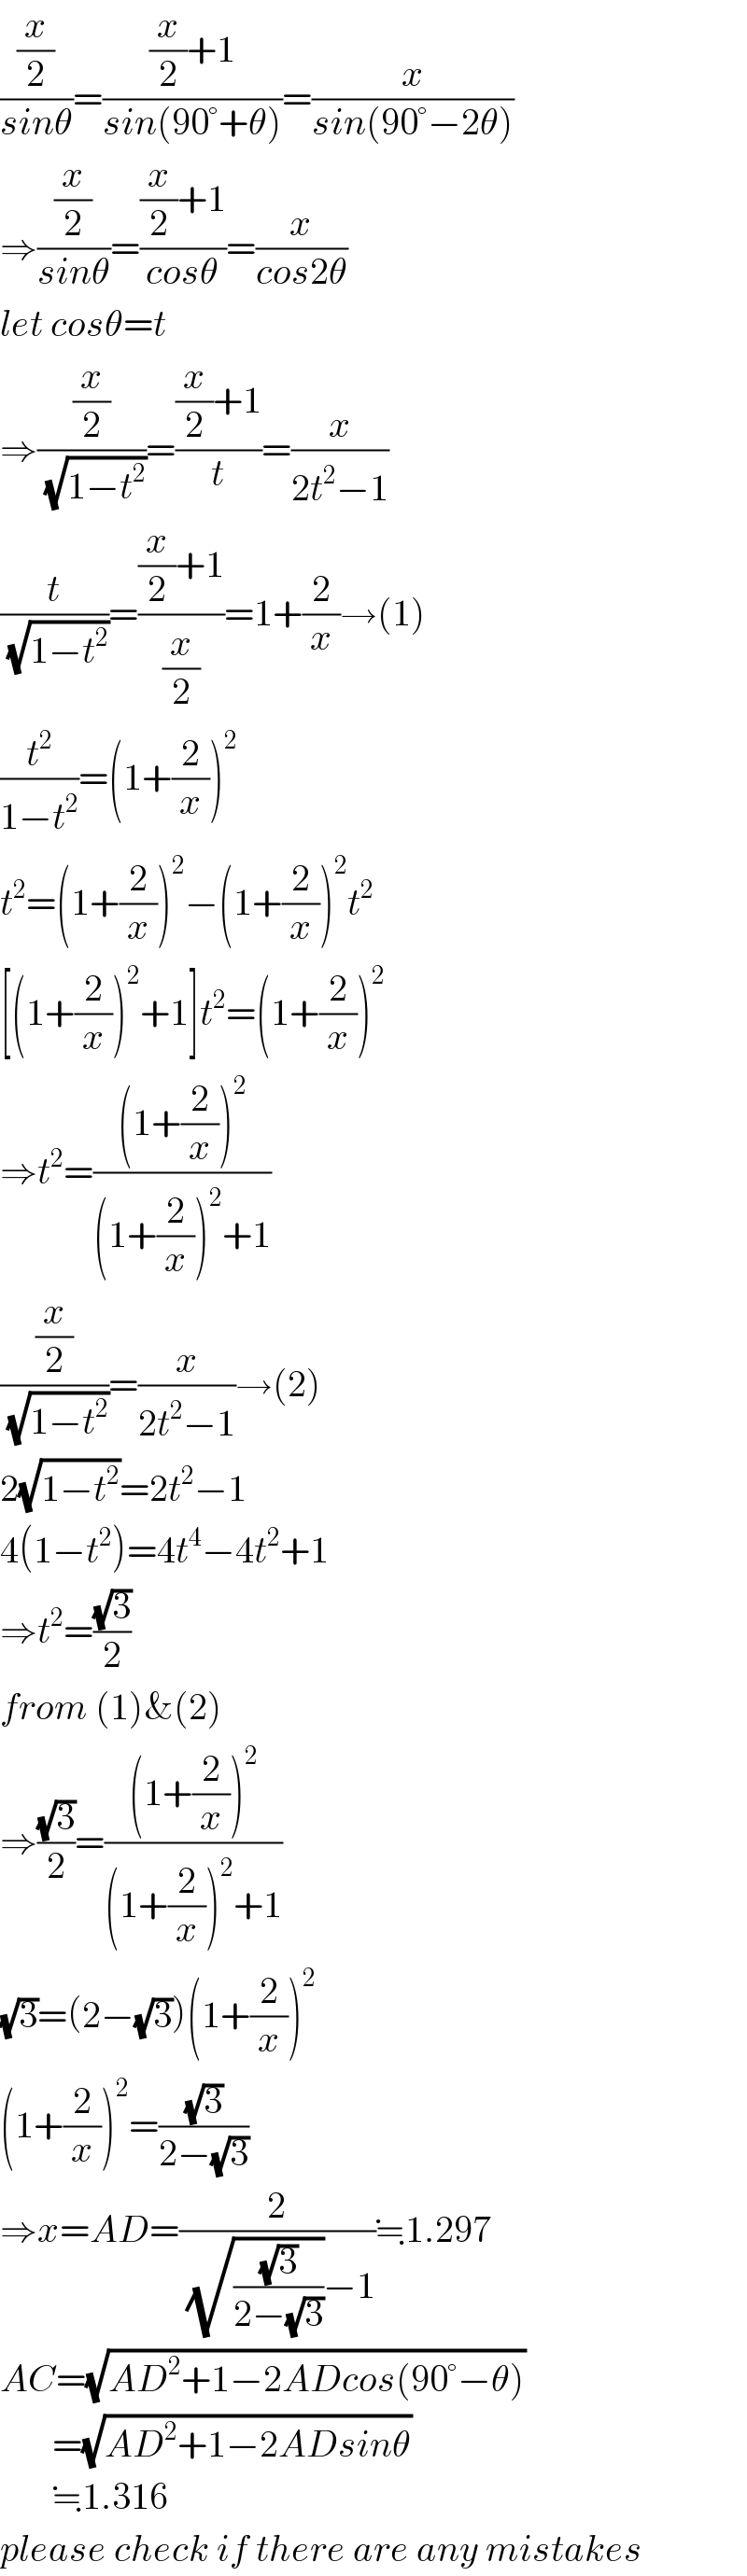 ((x/2)/(sinθ))=(((x/2)+1)/(sin(90°+θ)))=(x/(sin(90°−2θ)))  ⇒((x/2)/(sinθ))=(((x/2)+1)/(cosθ))=(x/(cos2θ))  let cosθ=t  ⇒((x/2)/(√(1−t^2 )))=(((x/2)+1)/t)=(x/(2t^2 −1))  (t/(√(1−t^2 )))=(((x/2)+1)/(x/2))=1+(2/x)→(1)  (t^2 /(1−t^2 ))=(1+(2/x))^2   t^2 =(1+(2/x))^2 −(1+(2/x))^2 t^2   [(1+(2/x))^2 +1]t^2 =(1+(2/x))^2   ⇒t^2 =(((1+(2/x))^2 )/((1+(2/x))^2 +1))  ((x/2)/(√(1−t^2 )))=(x/(2t^2 −1))→(2)  2(√(1−t^2 ))=2t^2 −1  4(1−t^2 )=4t^4 −4t^2 +1  ⇒t^2 =((√3)/2)  from (1)&(2)  ⇒((√3)/2)=(((1+(2/x))^2 )/((1+(2/x))^2 +1))  (√3)=(2−(√3))(1+(2/x))^2   (1+(2/x))^2 =((√3)/(2−(√3)))  ⇒x=AD=(2/((√((√3)/(2−(√3))))−1))≒1.297  AC=(√(AD^2 +1−2ADcos(90°−θ)))         =(√(AD^2 +1−2ADsinθ))         ≒1.316  please check if there are any mistakes  